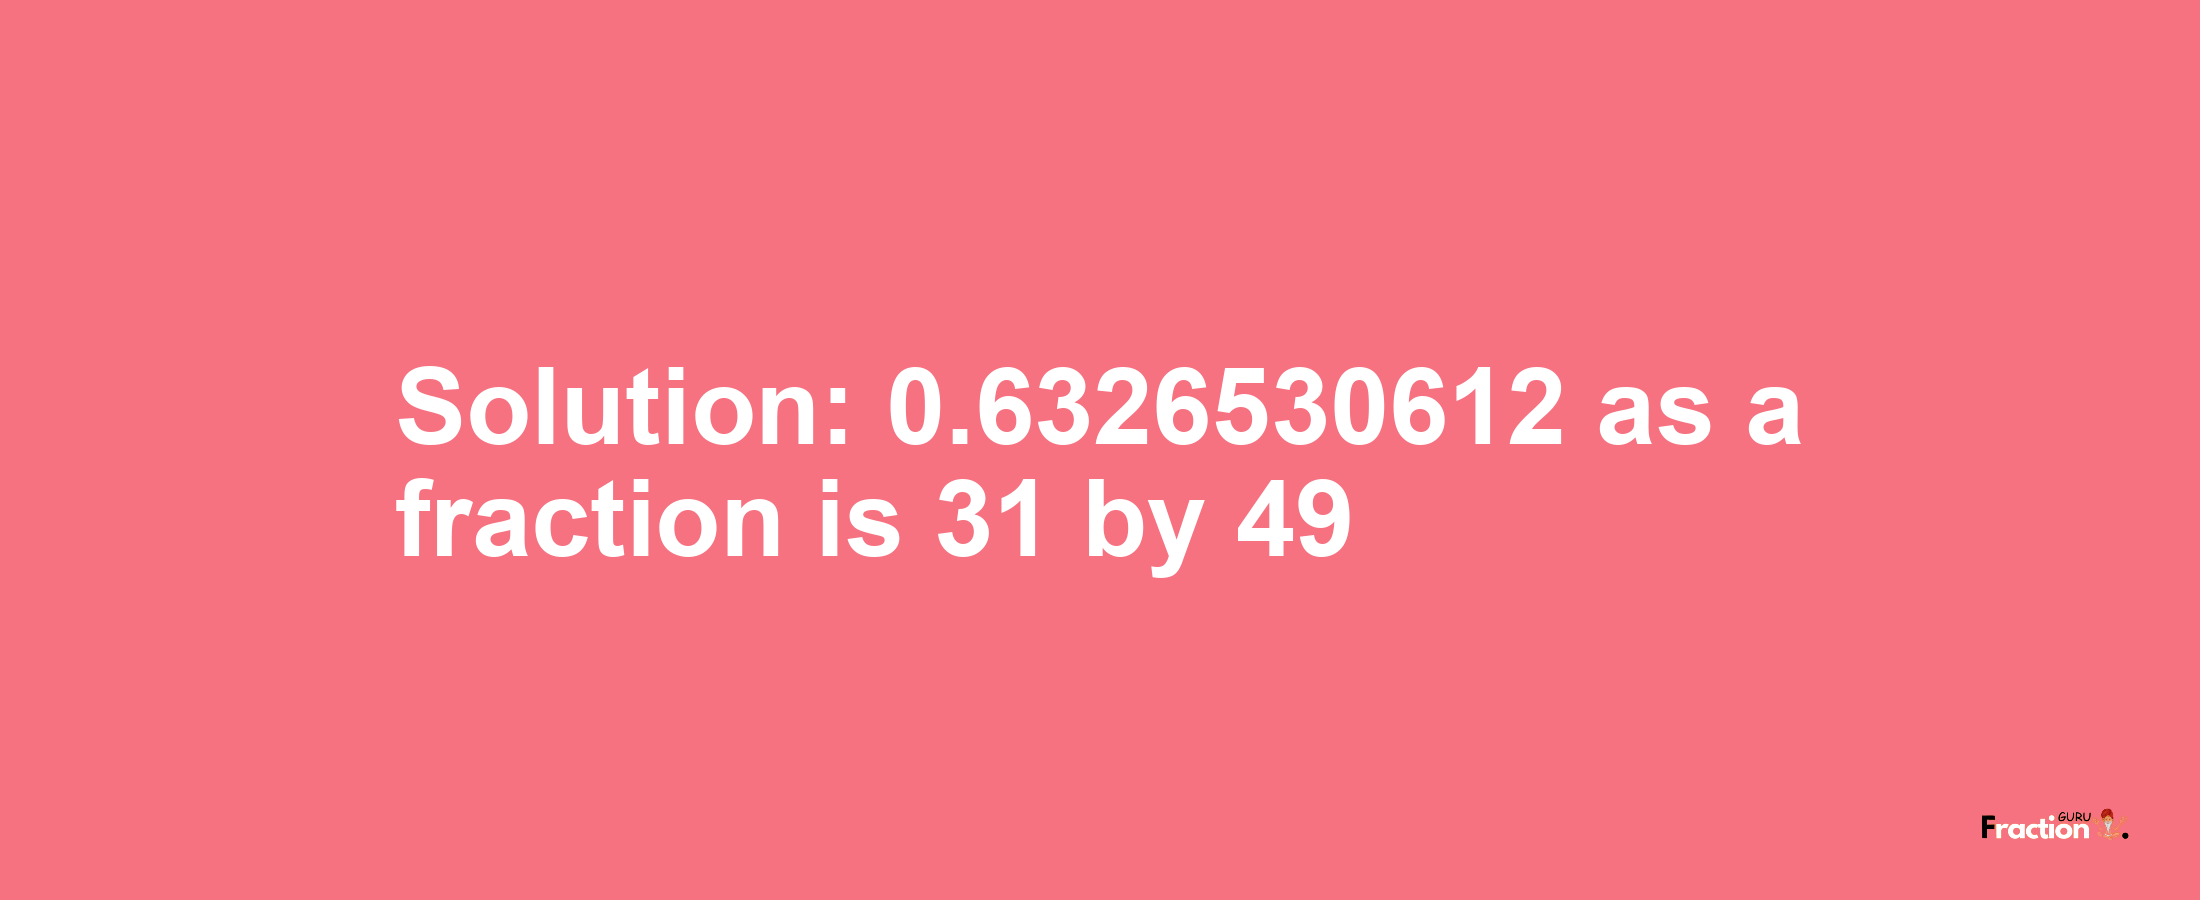 Solution:0.6326530612 as a fraction is 31/49